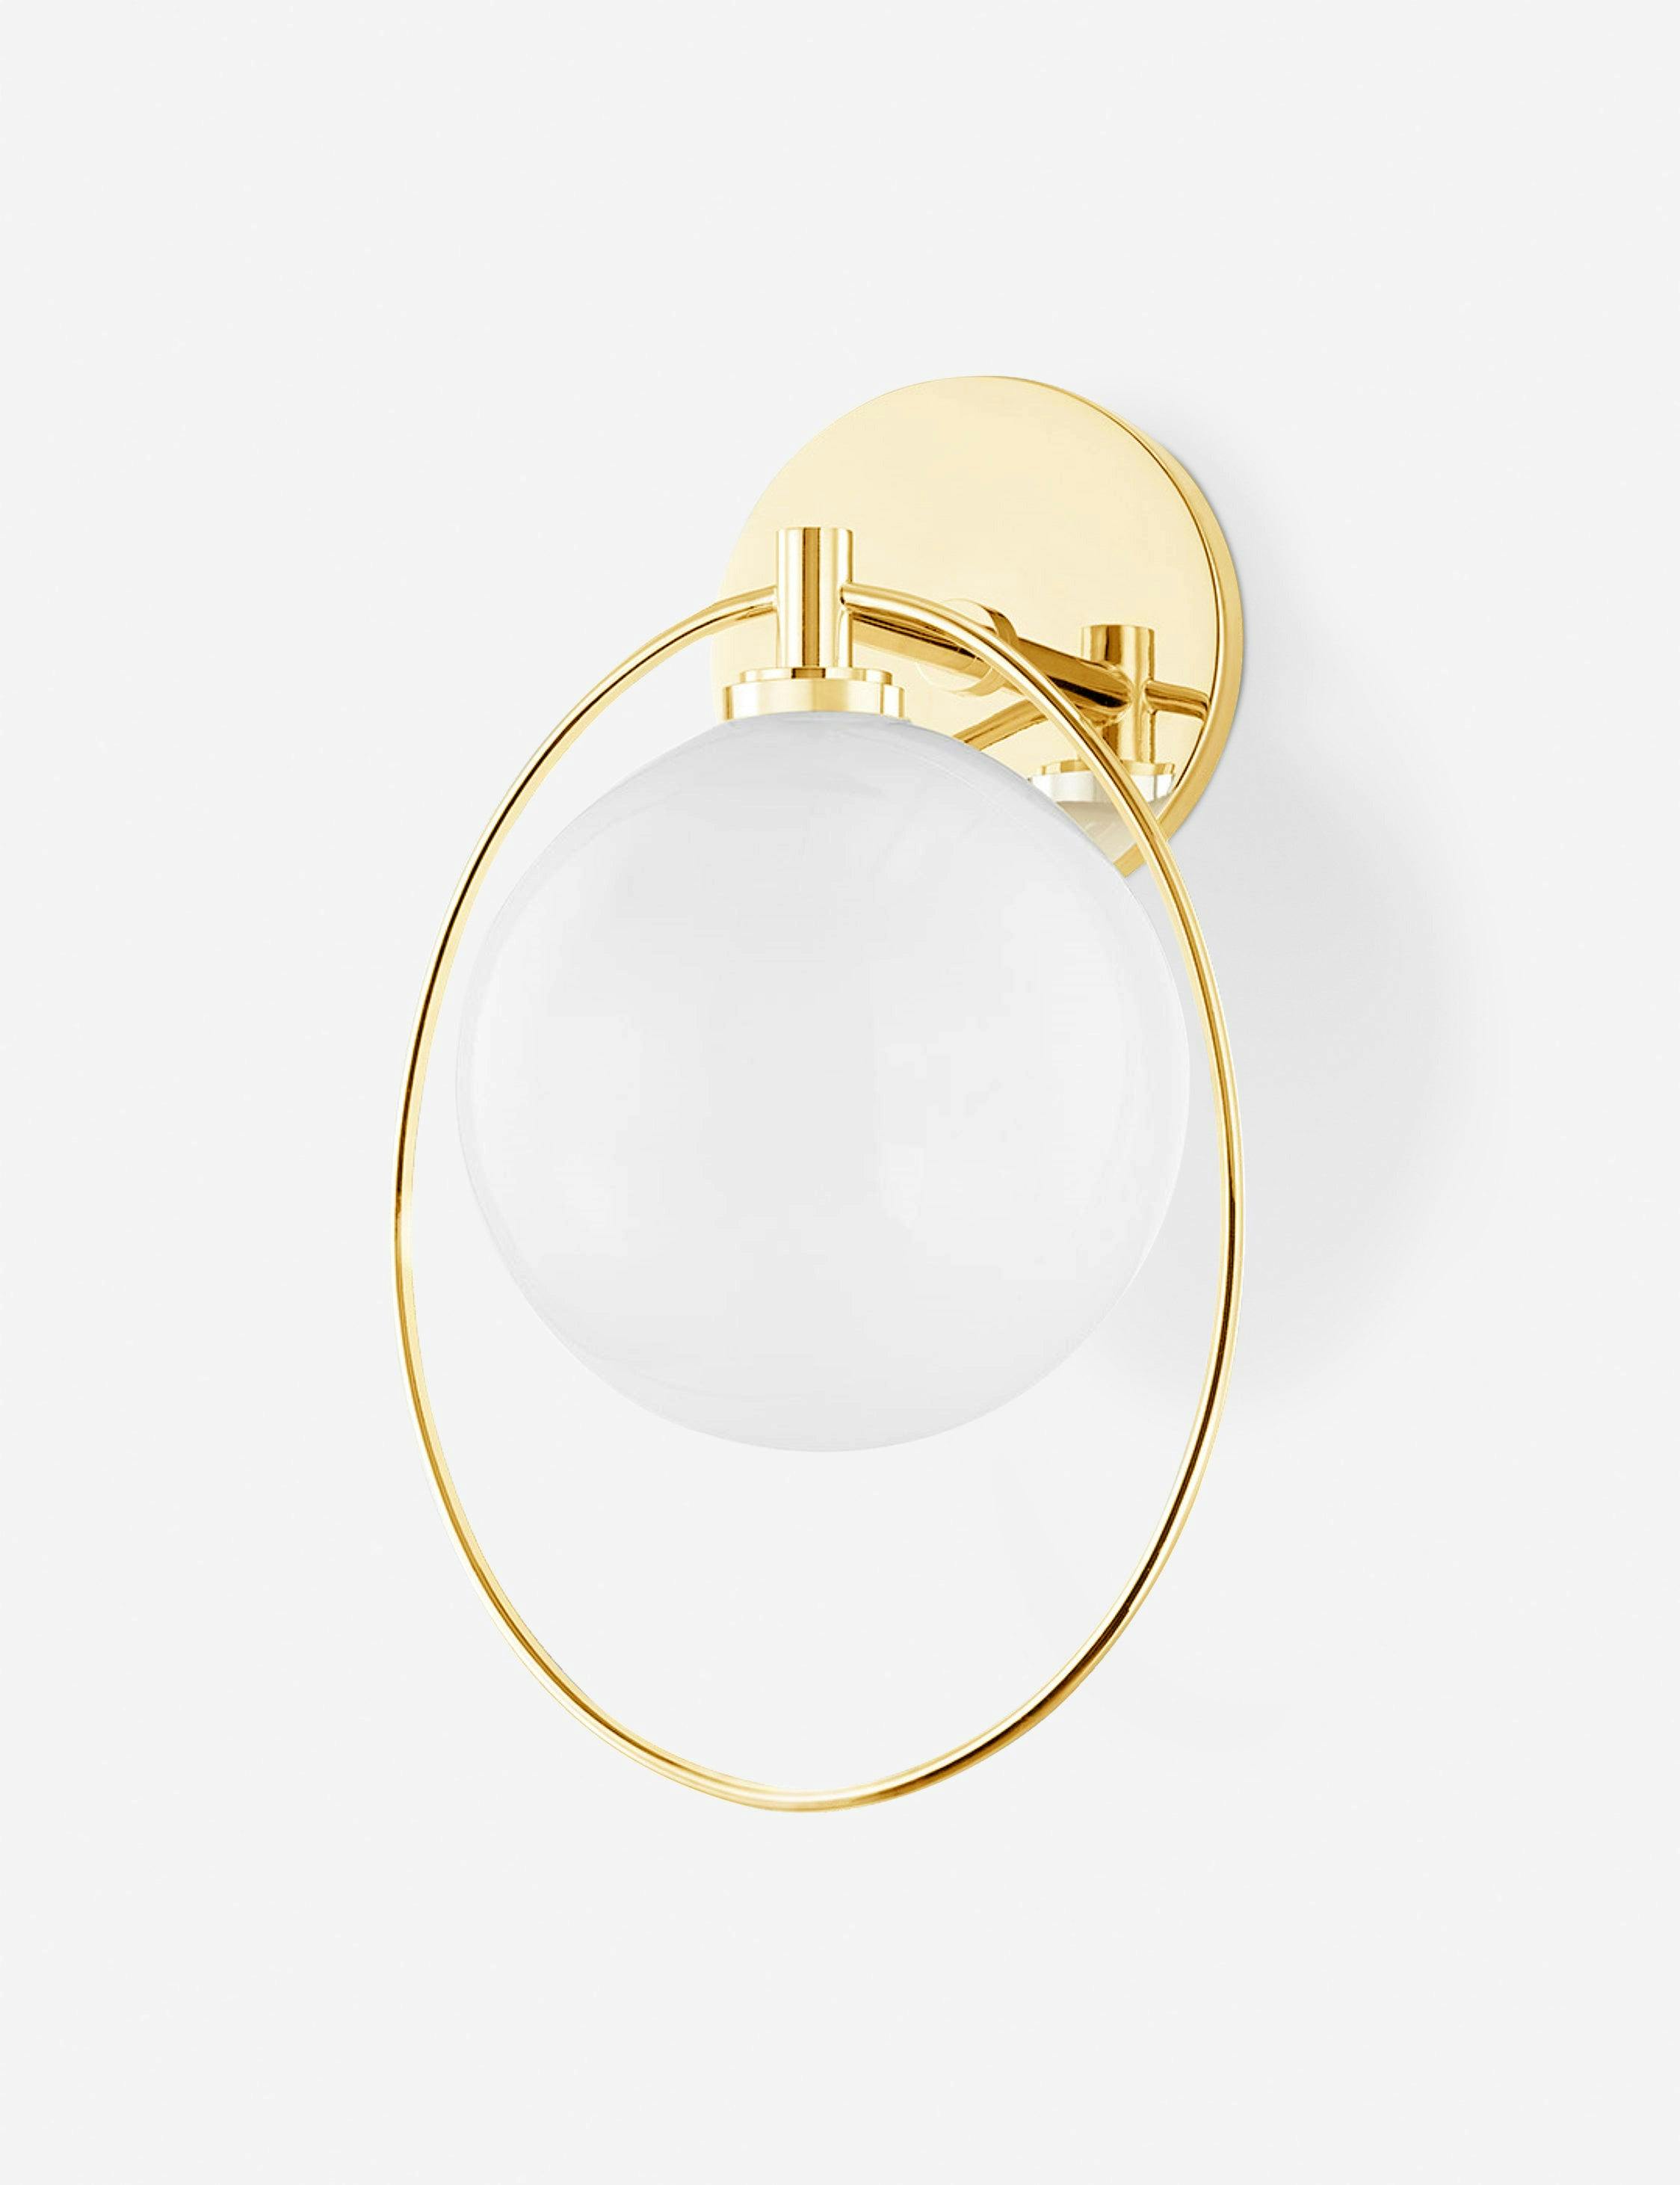 Eloise Aged Brass Dimmable Glass Sconce with Opal Shade